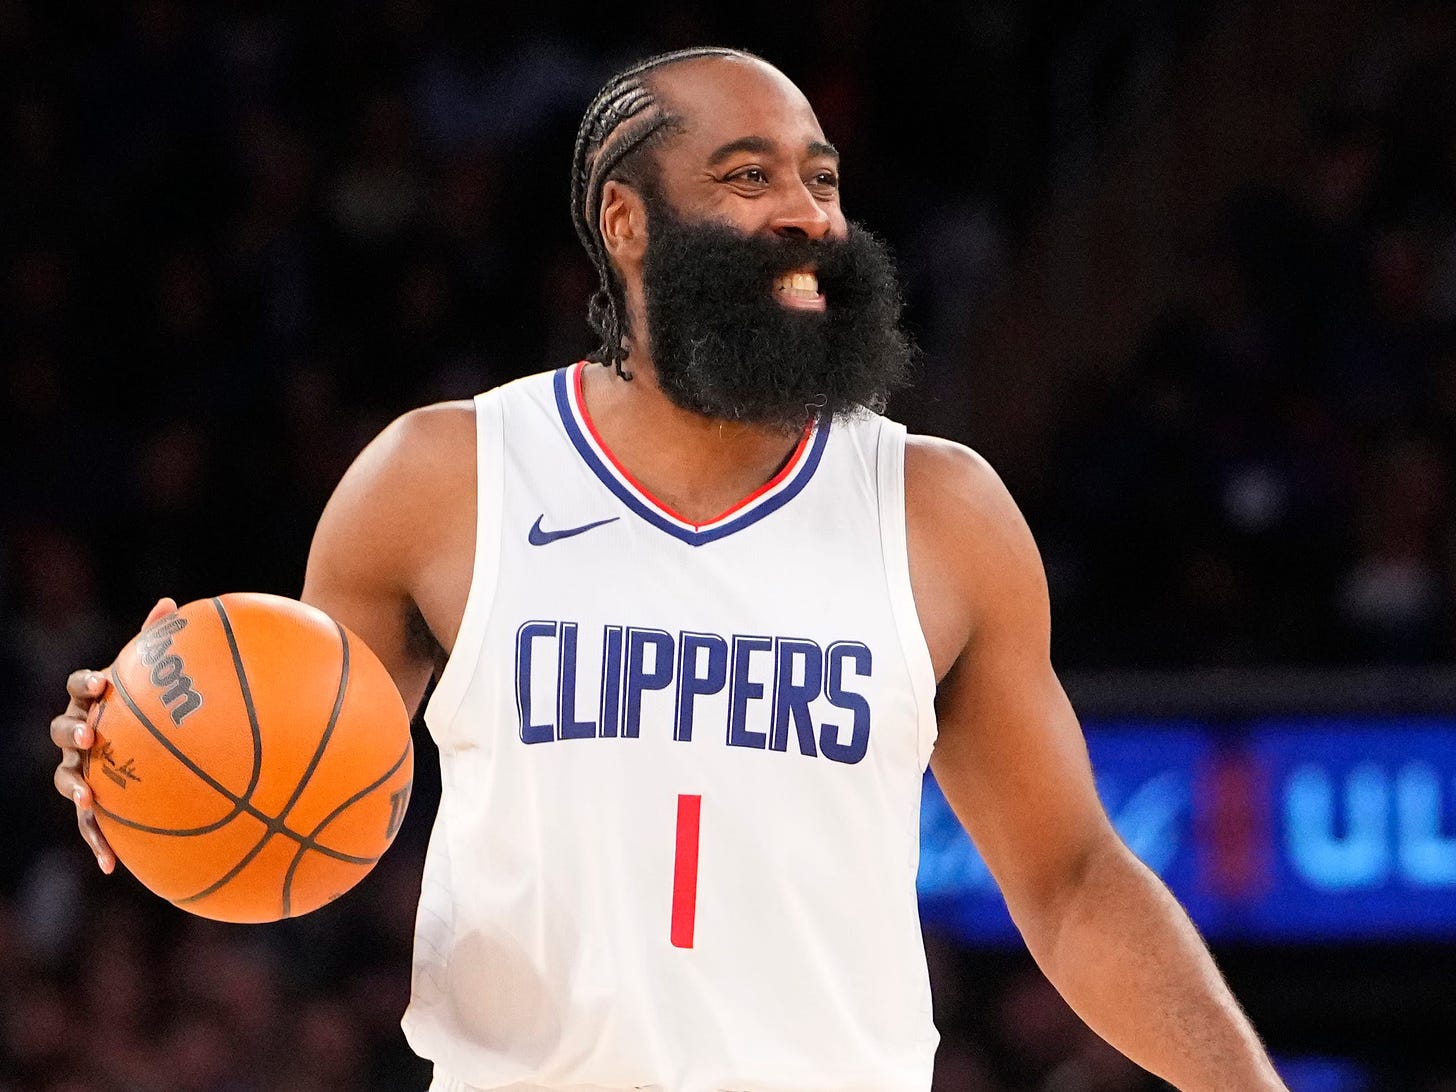 James Harden makes LA Clippers debut in loss to New York Knicks